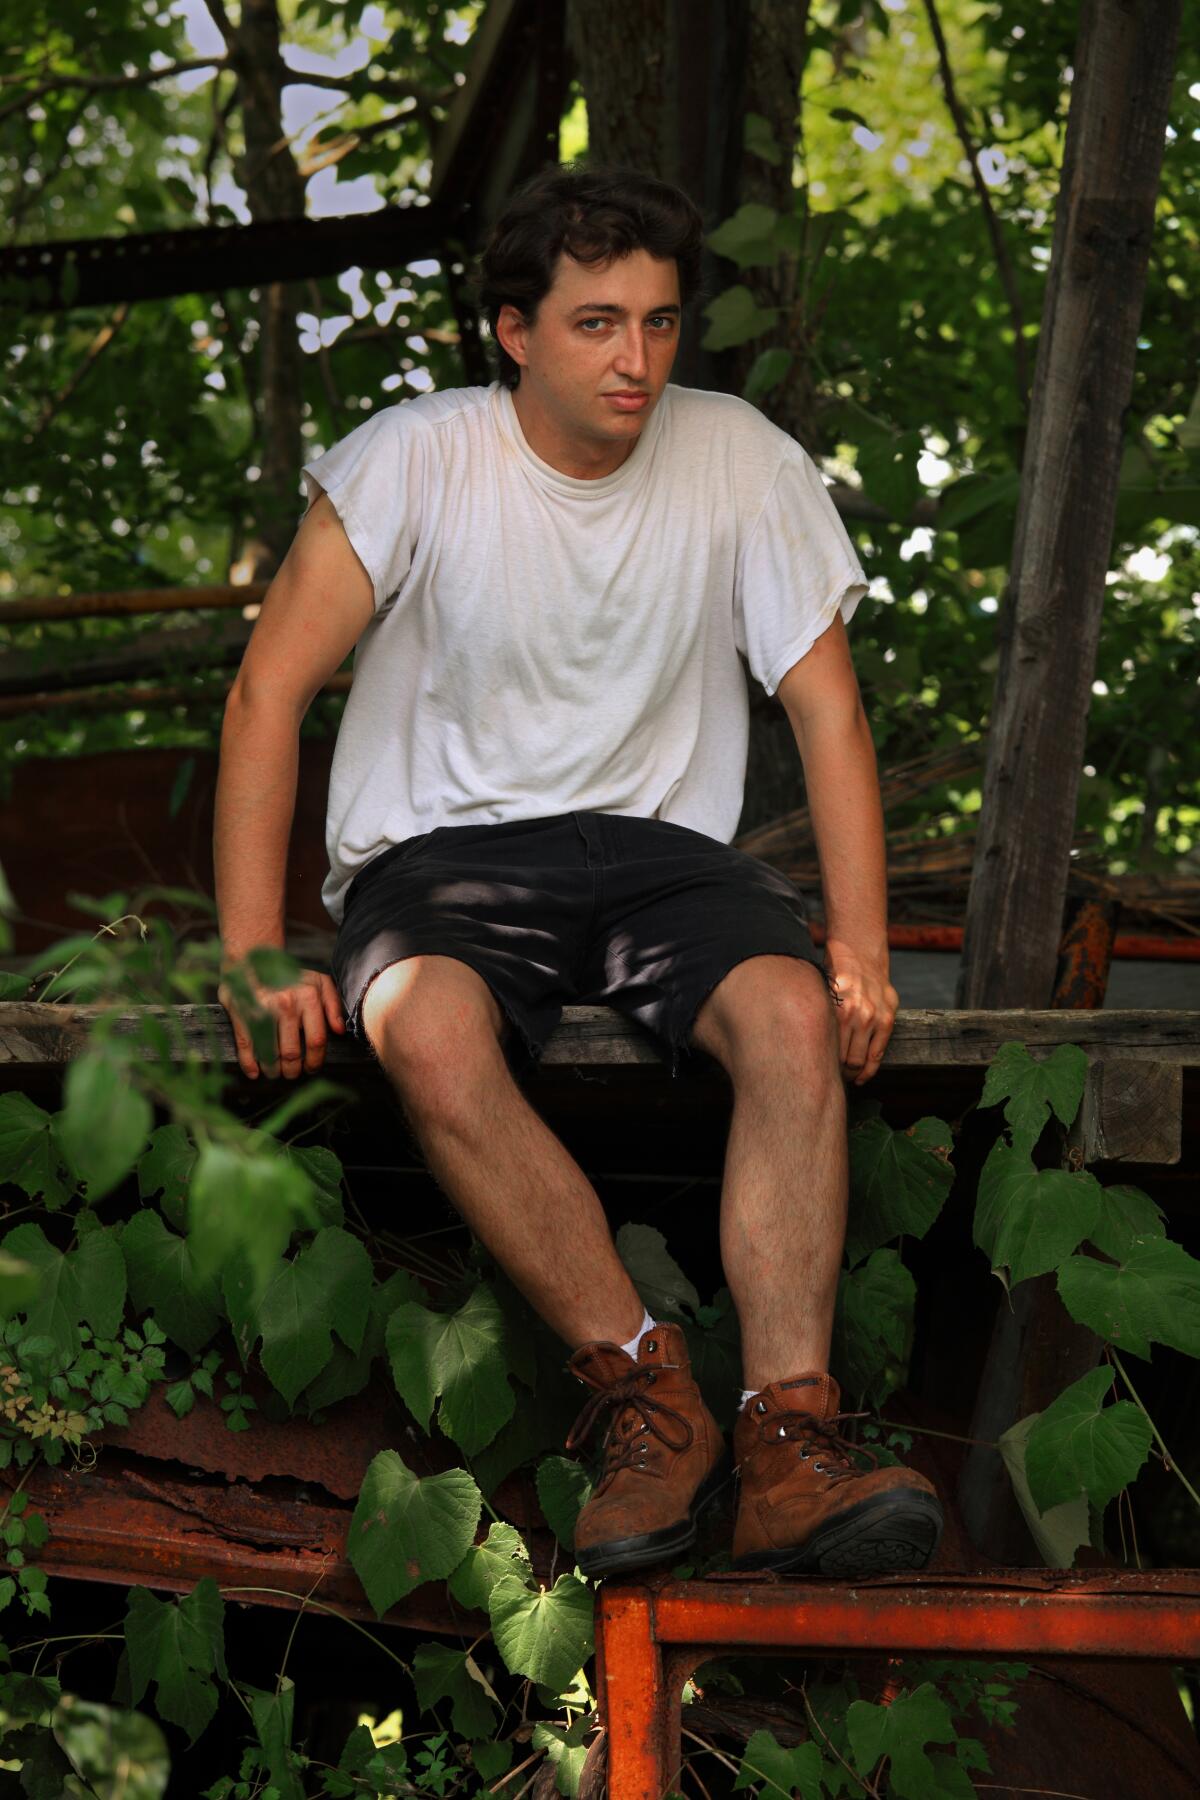 Pictured here in 2012, we mostly just want to see what Benh Zeitlin, the Oscar-nominated wunderkind filmmaker behind "Beasts of the Southern Wild," looks like today. He's finally set to unveil his second feature, the "Peter Pan"-inspired "Wendy," which Searchlight will open theatrically on Feb. 28.